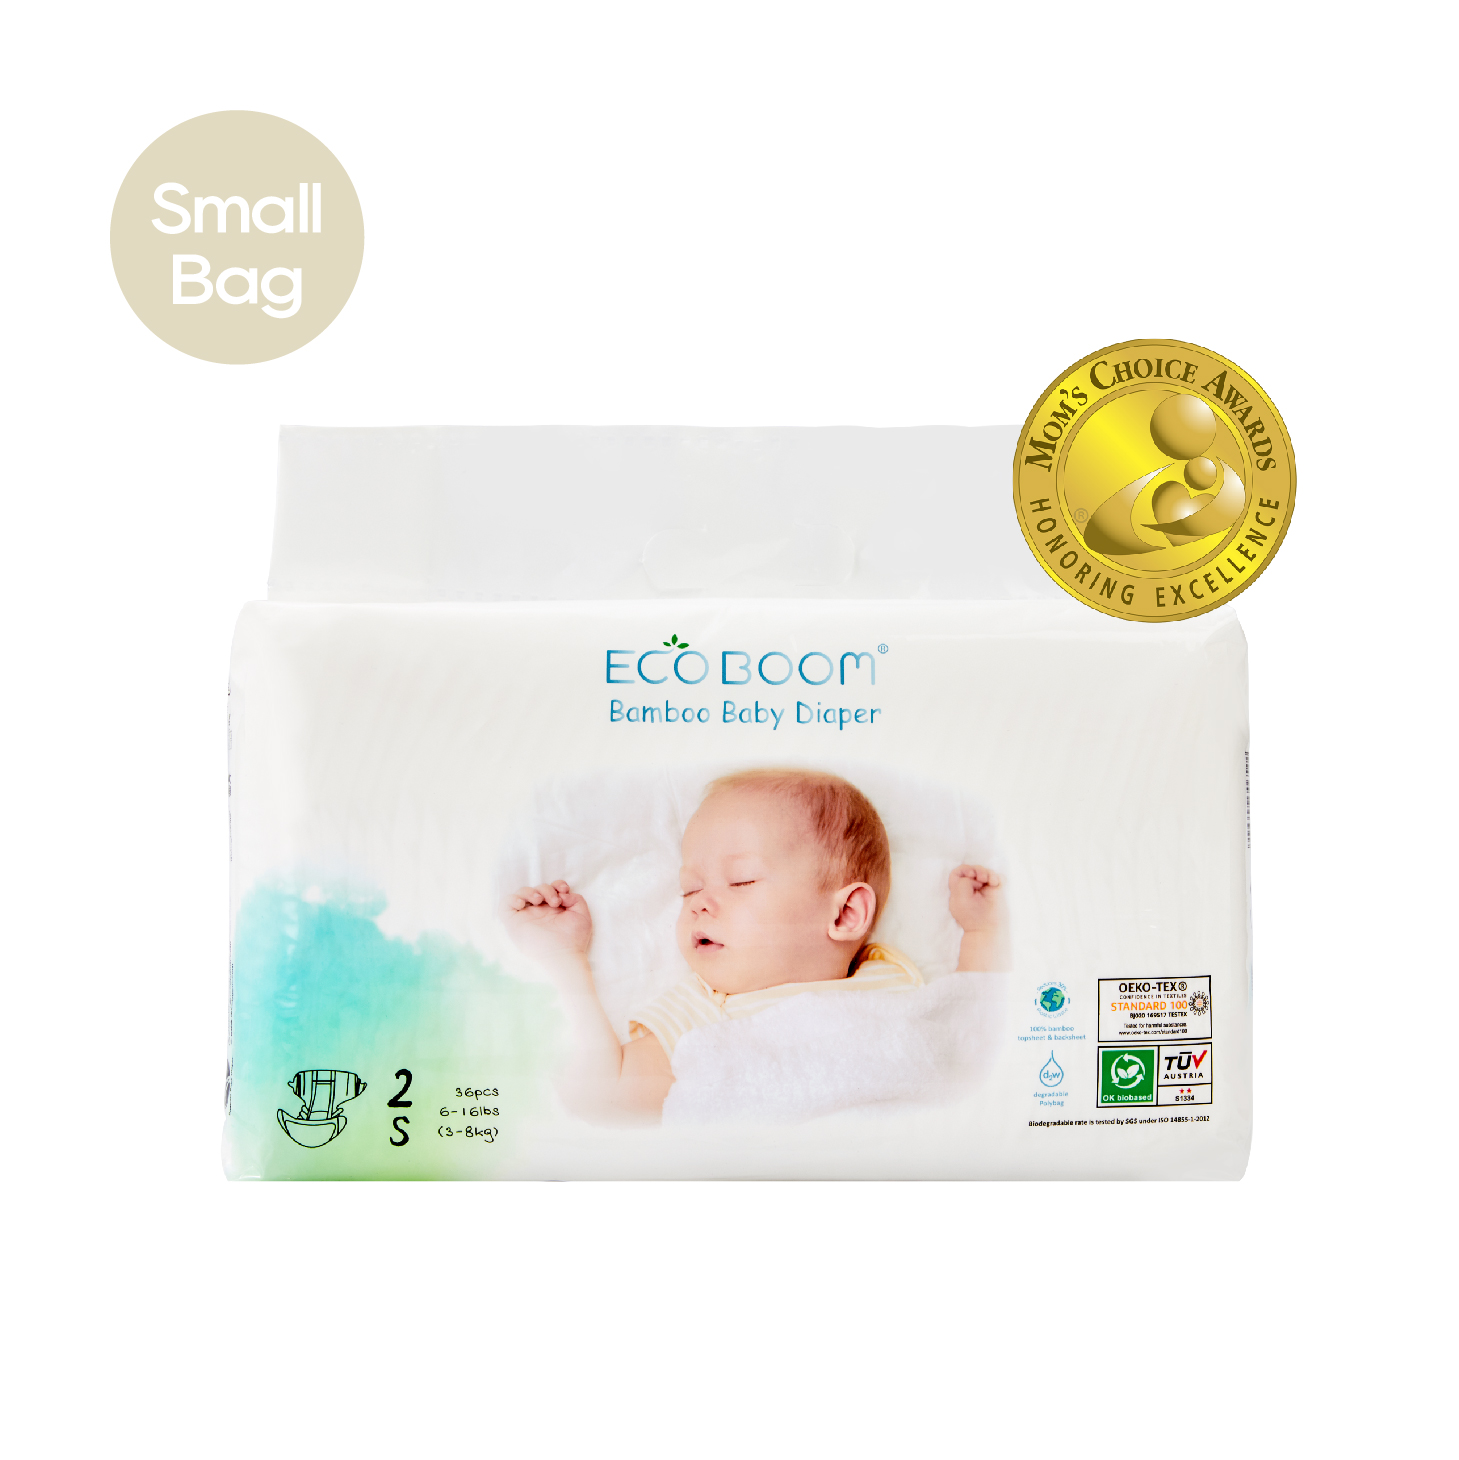 bamboo-baby-diapers-manufacturer-small-bag